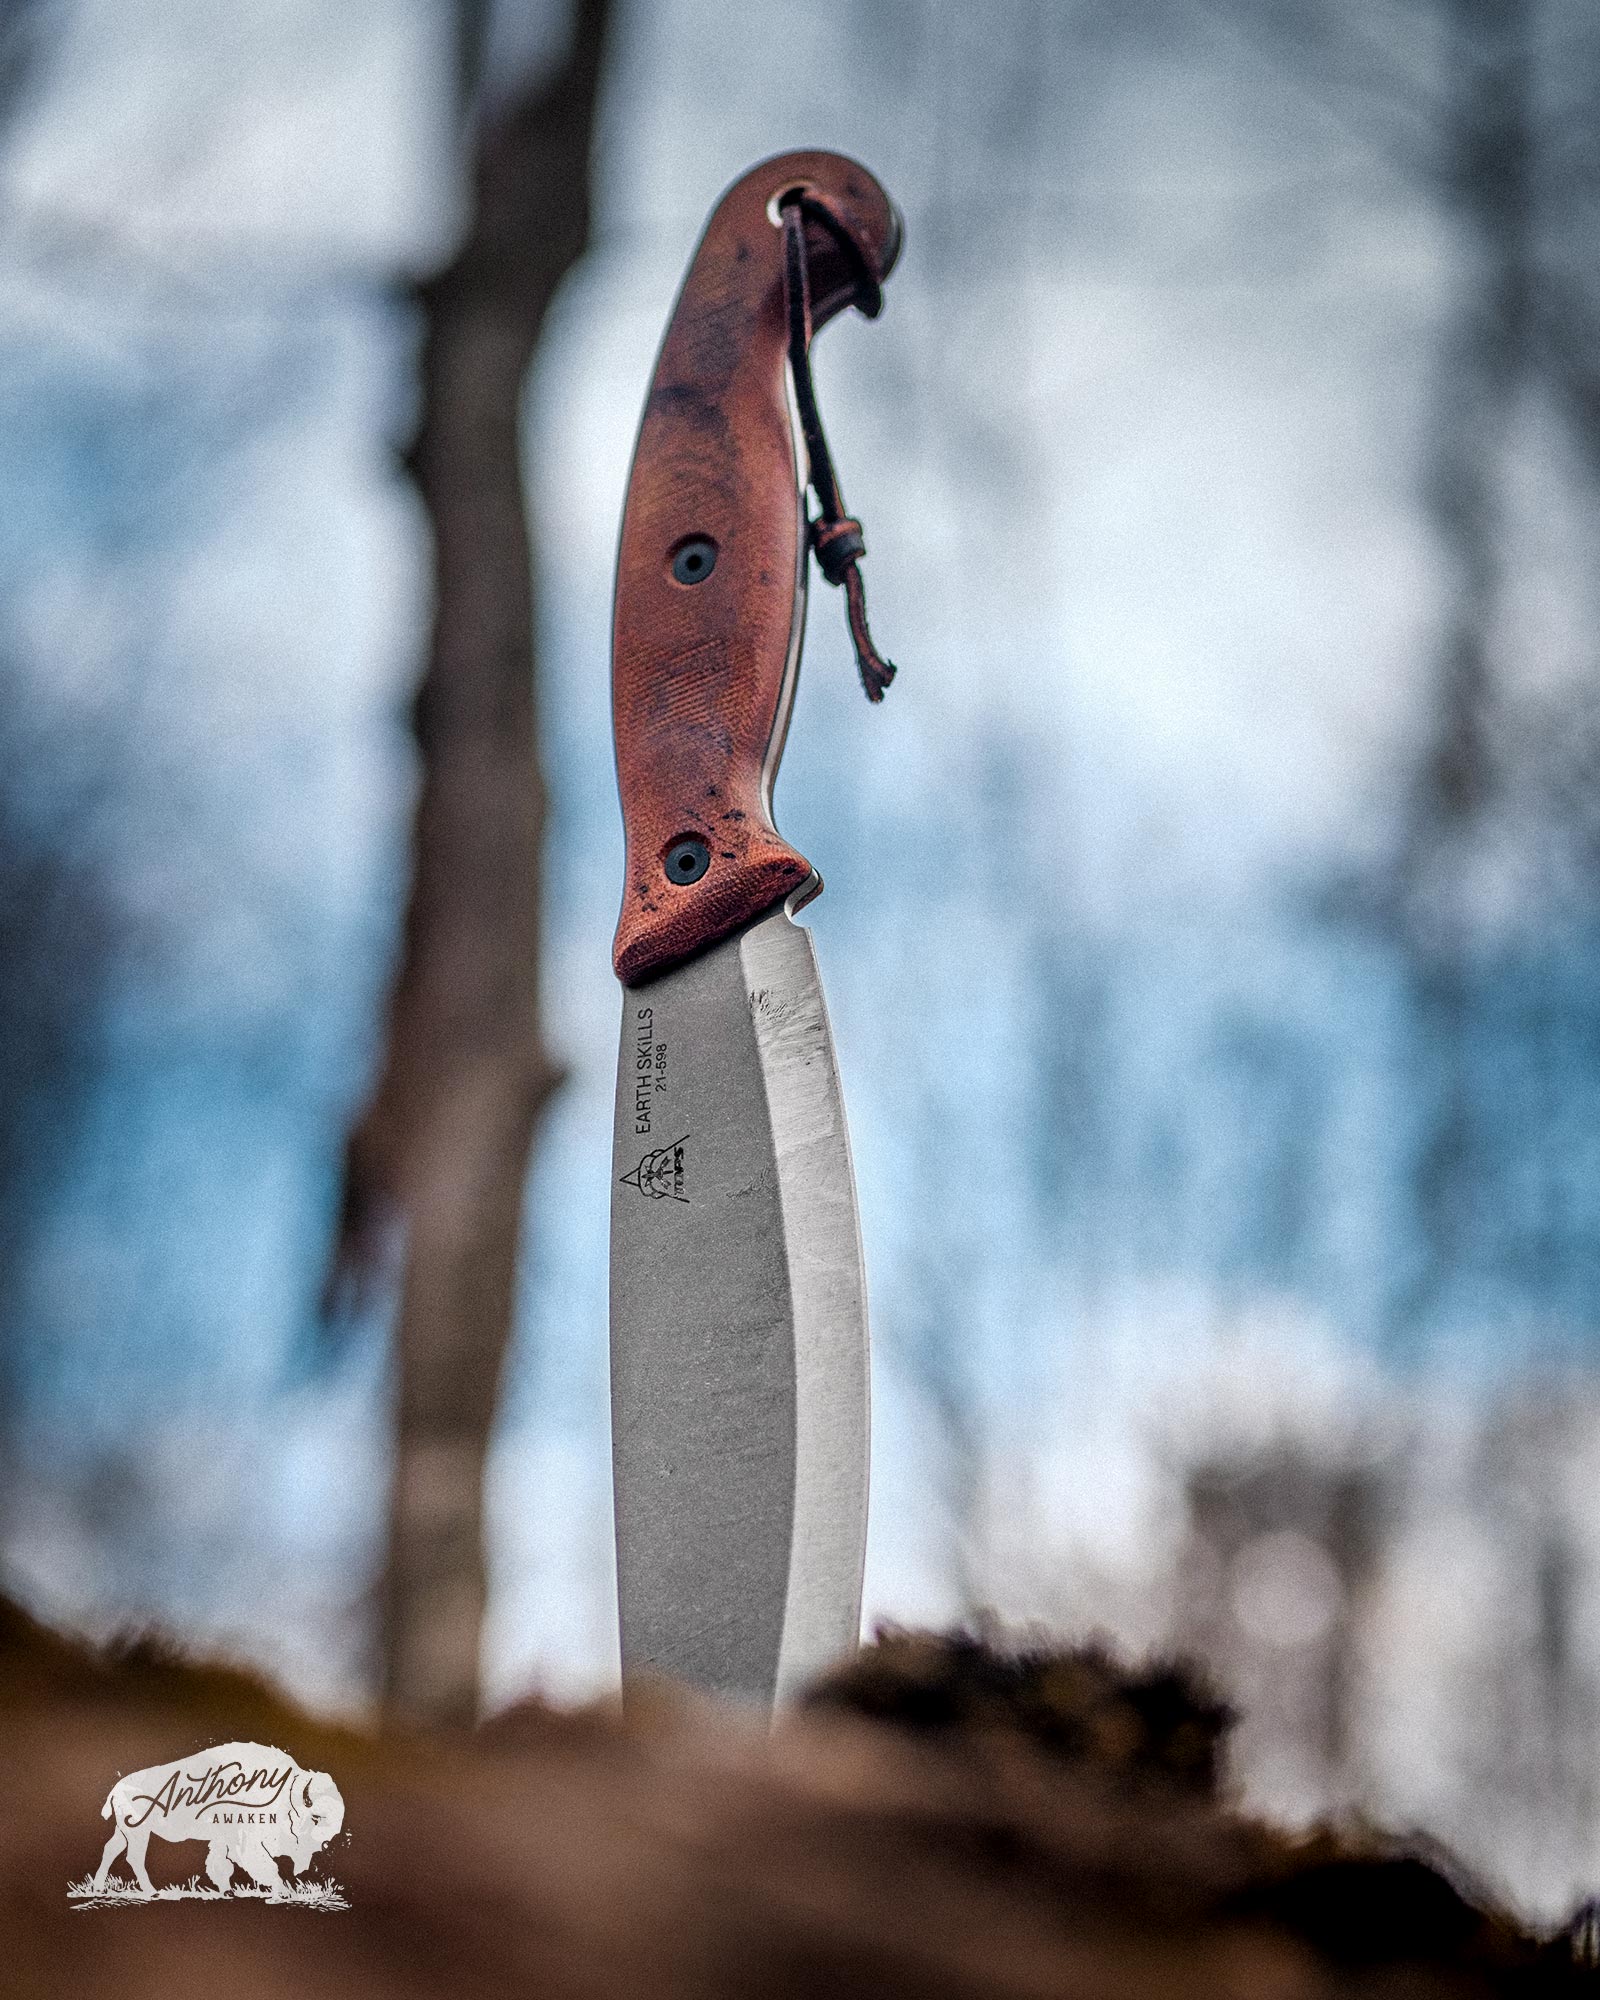 Tops Earth Skills Knife Review